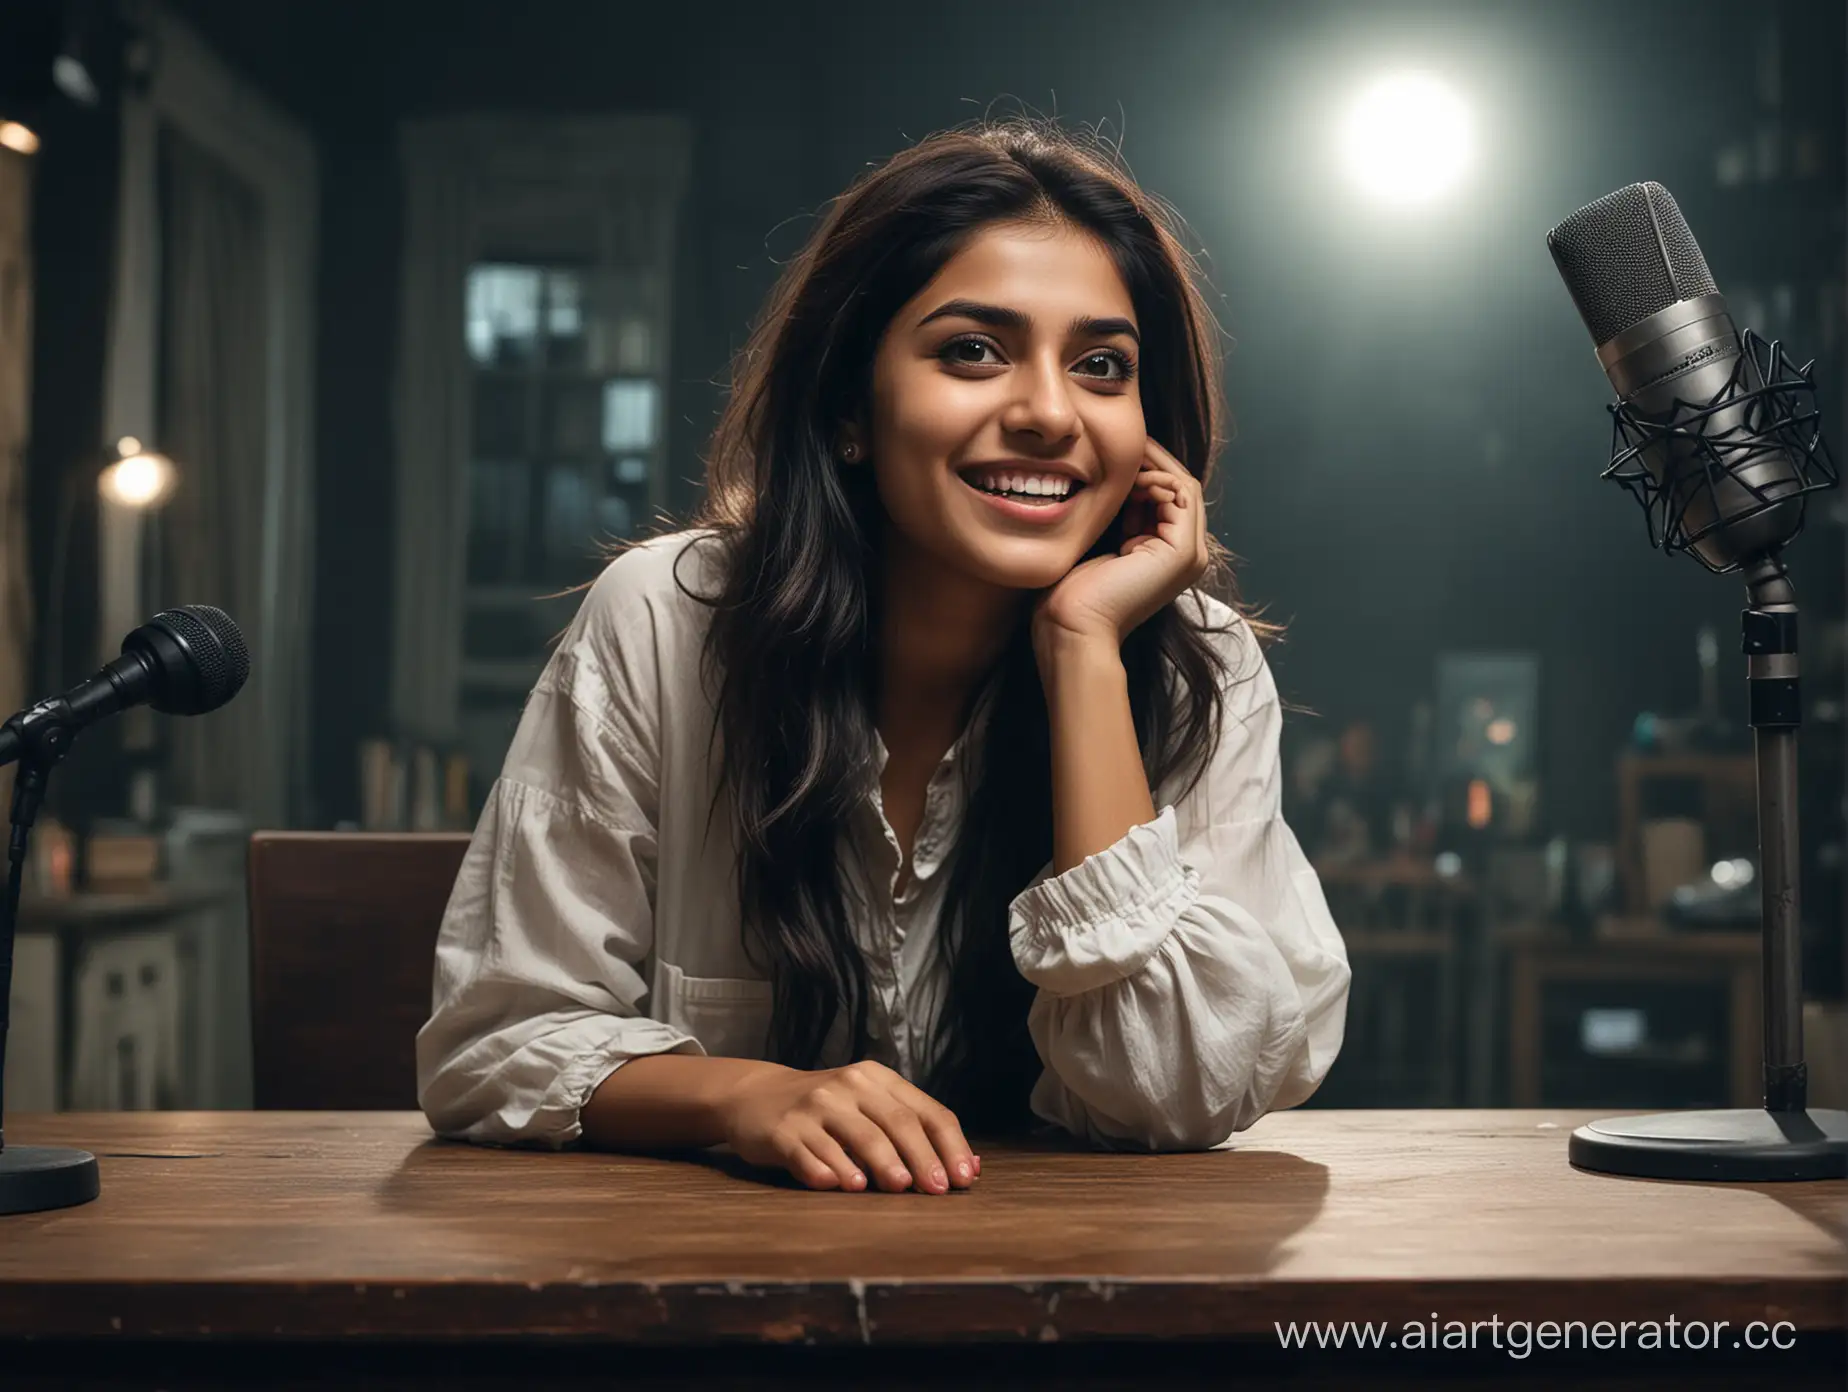  horror story studio on a Pakistani girl who looks happy and excited, sitting on a table with a mic in front of her background is night and scary, realistic, looking at the front, she is the host of the channel, everything should look real,